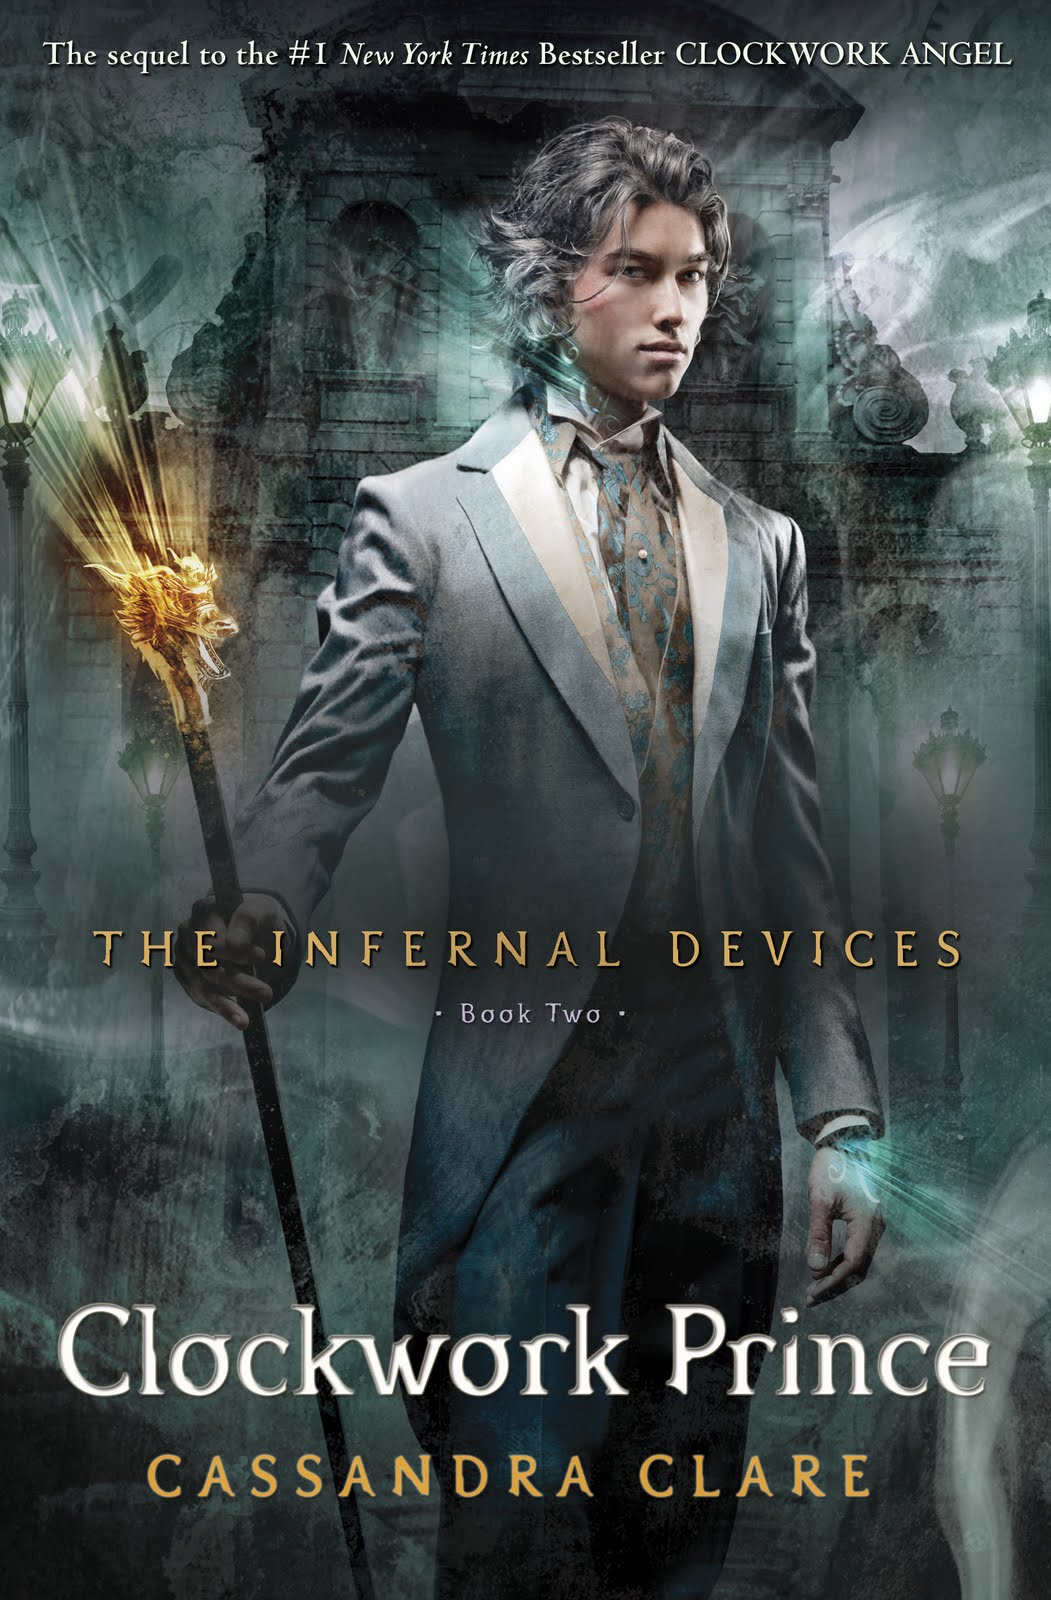 Book Review: The Infernal Devices 2: 'Clockwork Prince' by Cassandra Clare. The Young Folks